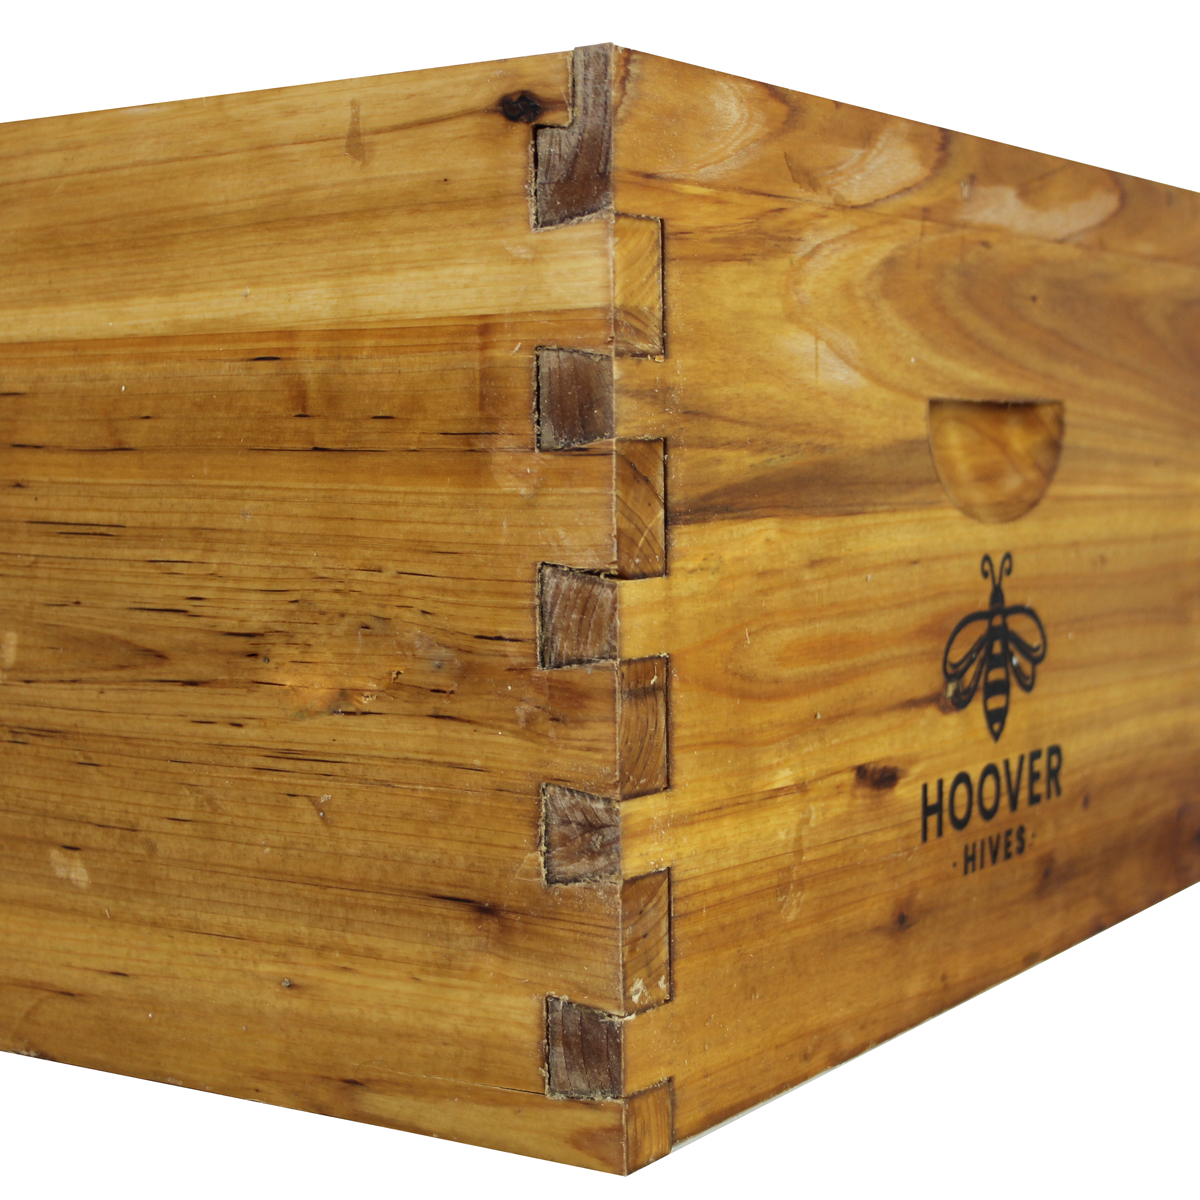 Hoover Hives Wax Coated 10 Frame Deep Bee Box Has Dovetails in Every Joint